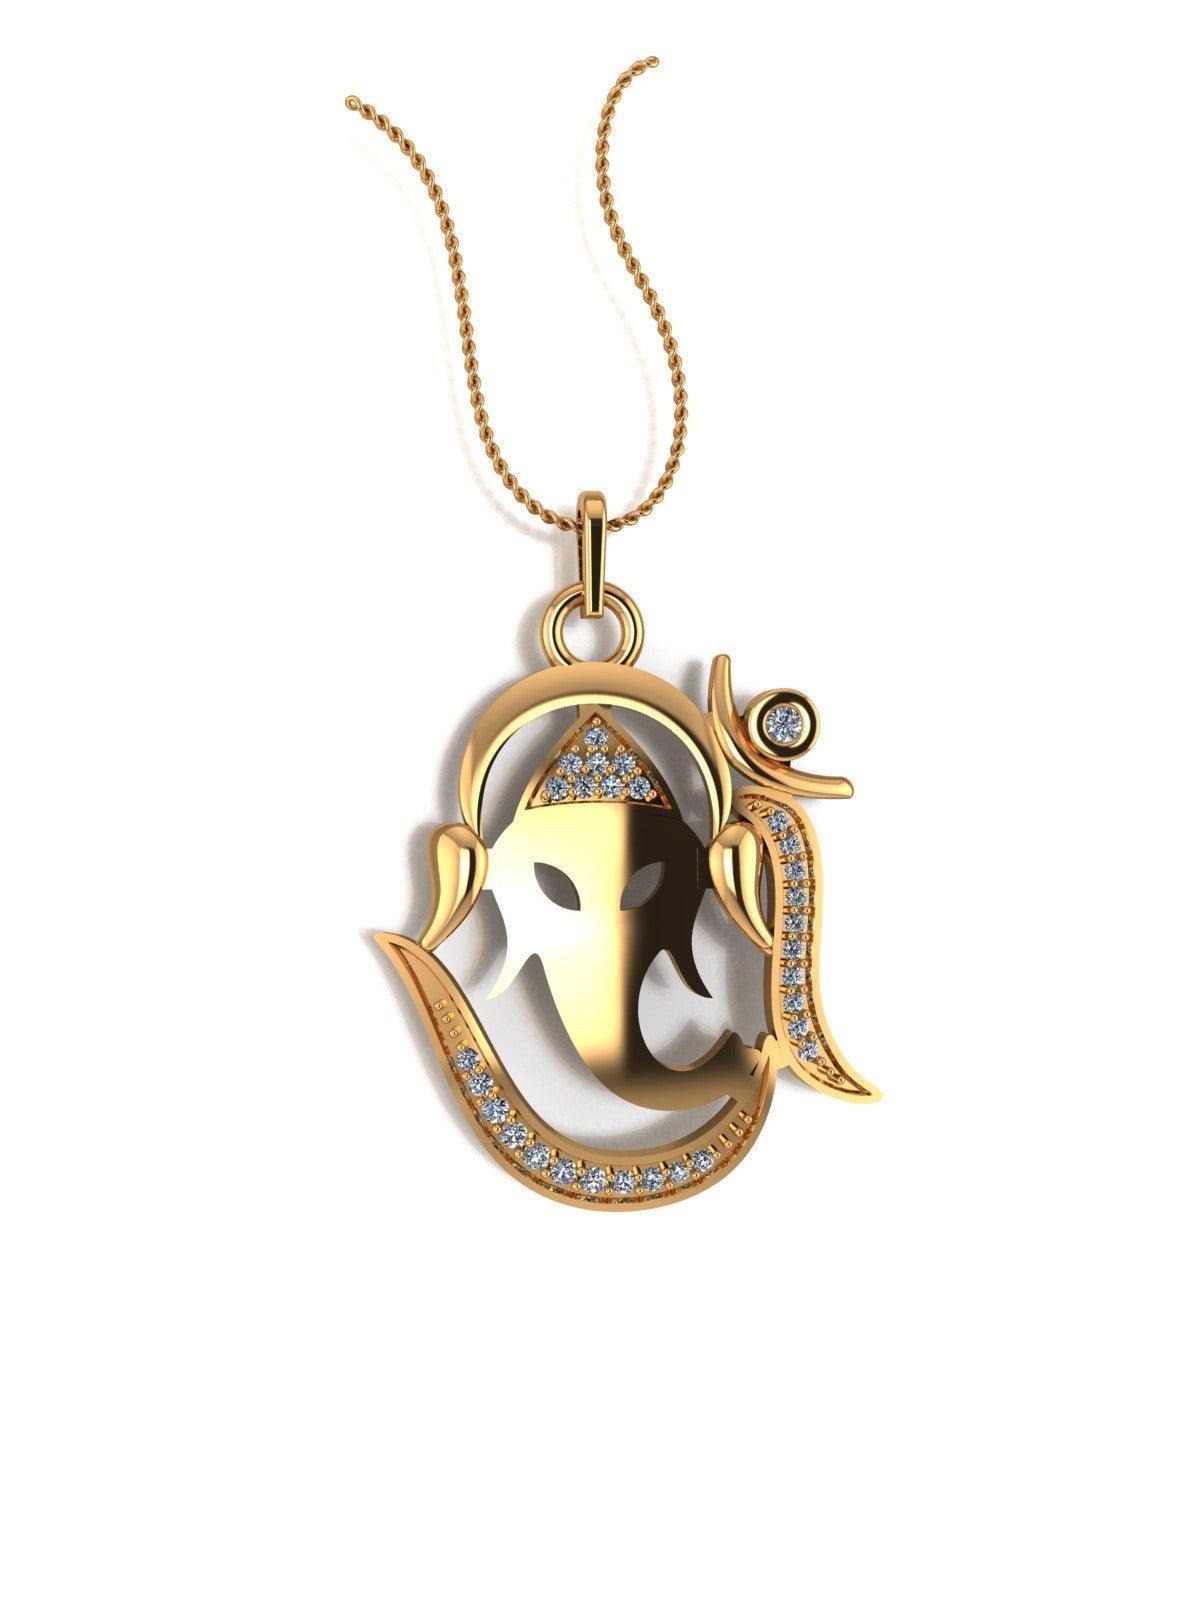 Lord Ganesha Silver Pendant with chain - Chandrani Pearls